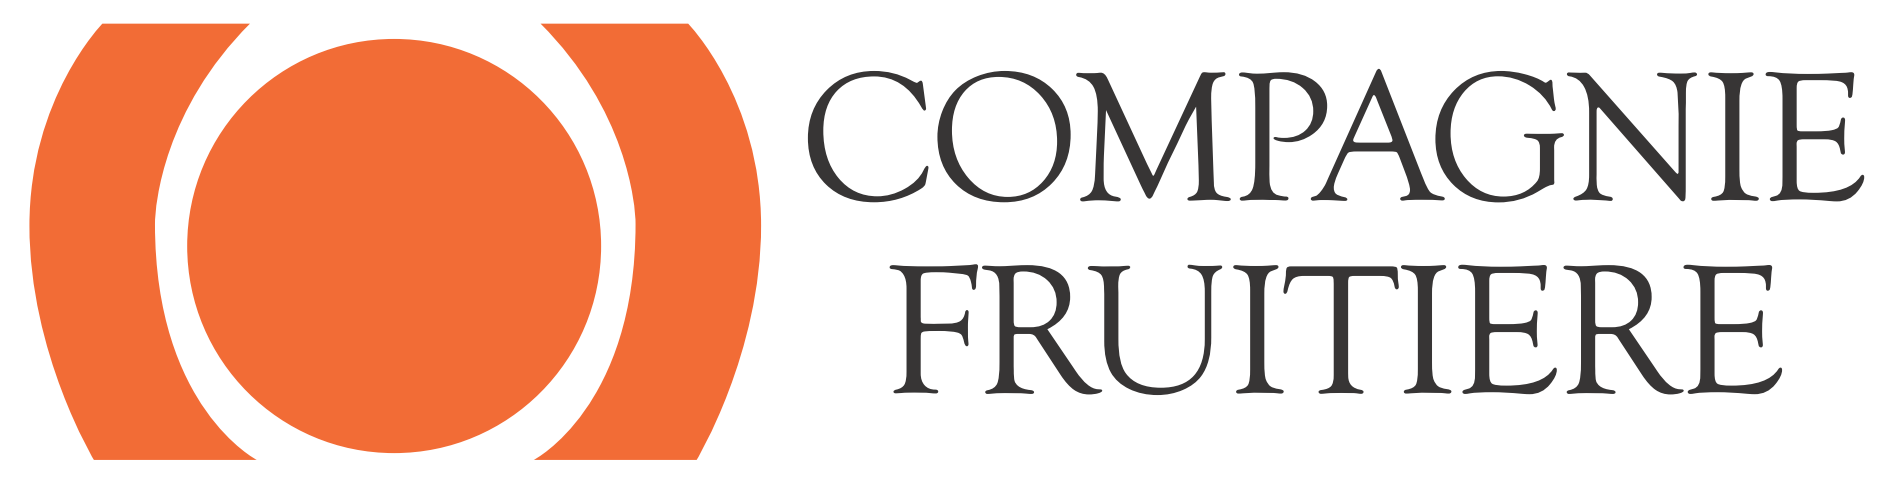 COMPAGNIE FRUITIERE